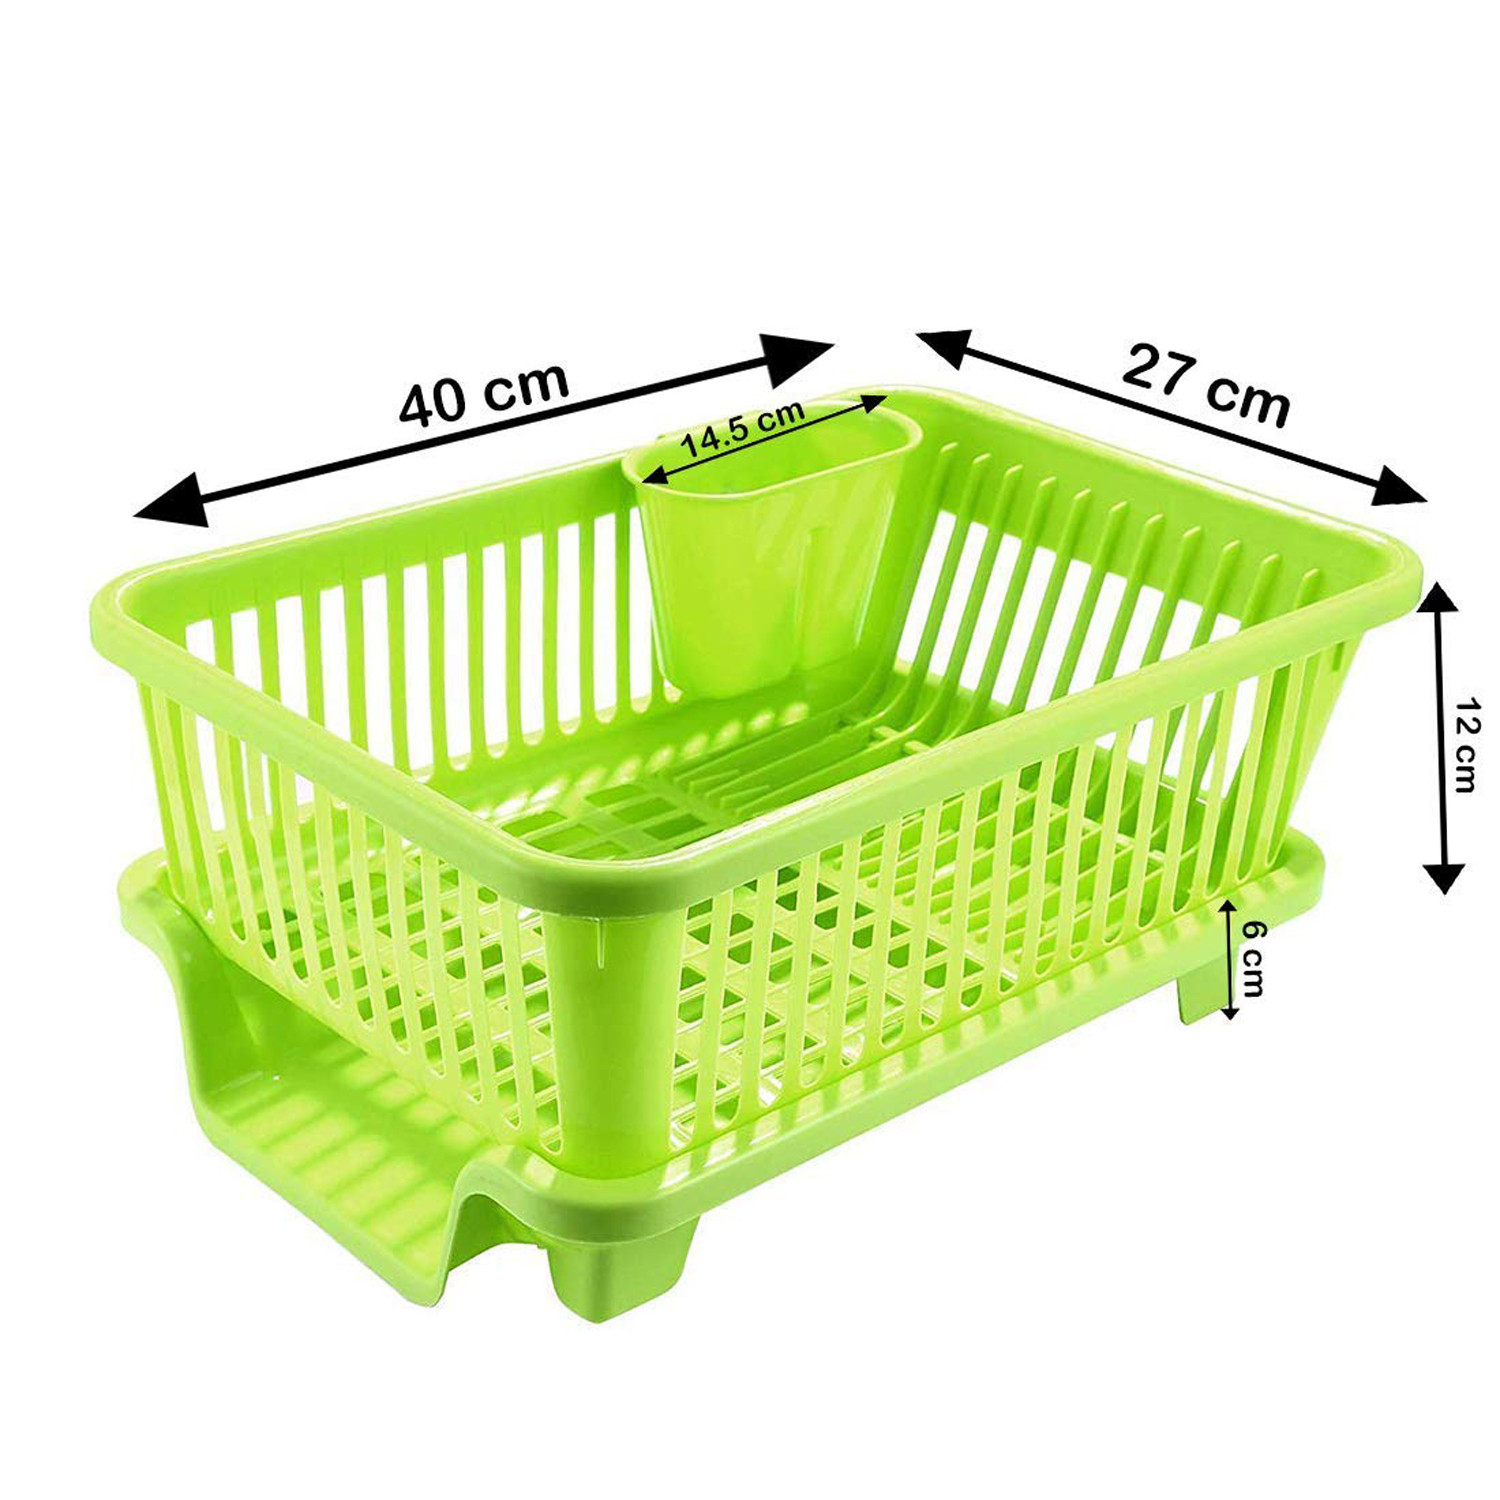 Kuber Industries  3 in 1 Large Durable Plastic Kitchen Sink Dish Rack Drainer Drying Rack Washing Basket with Tray for Kitchen, Dish Rack Organizers, Utensils Tools Cutlery (Green)